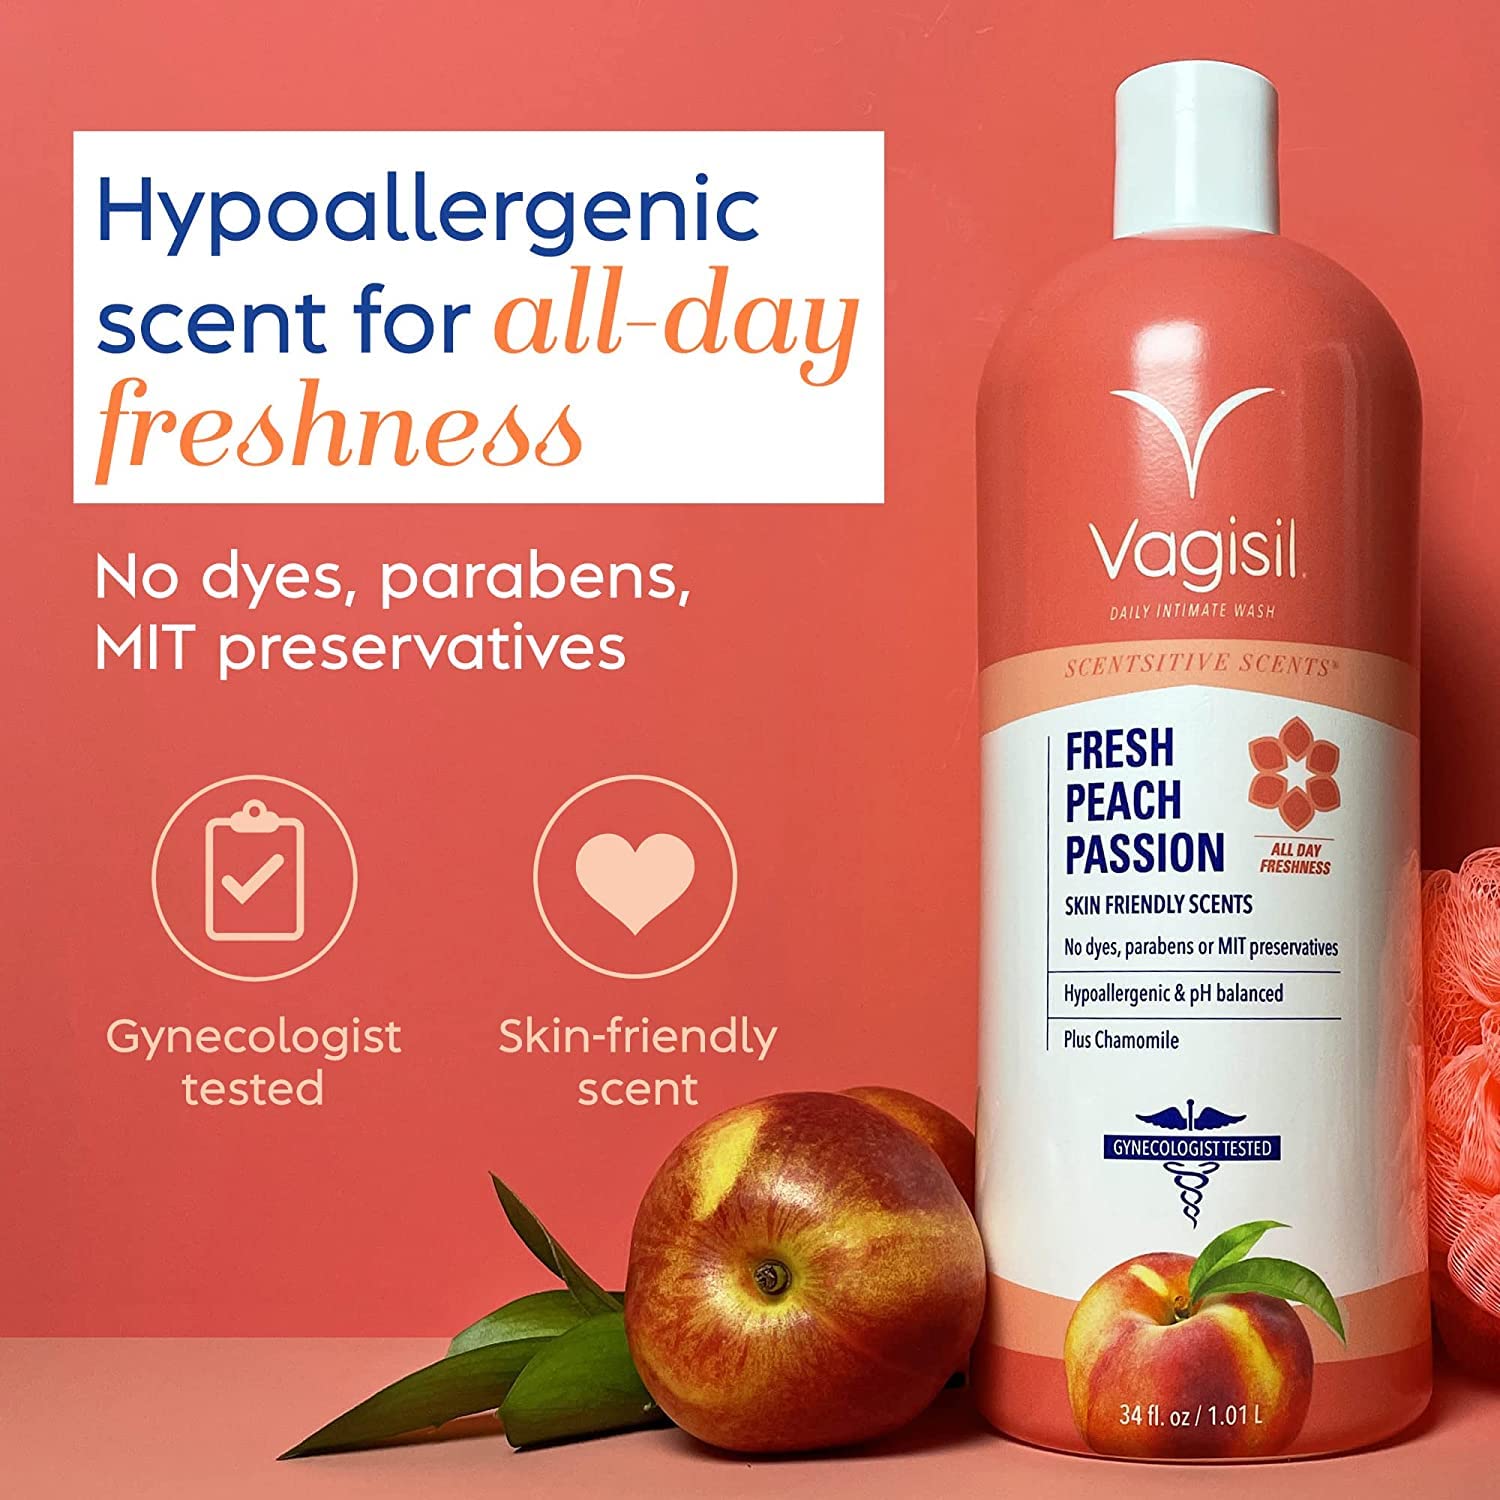 Vagisil Scentsitive Scents Fresh Peach Passion Daily Intimate Wash for Women, Gynecologist Tested, 34 Fl Oz (1L) : Health & Household